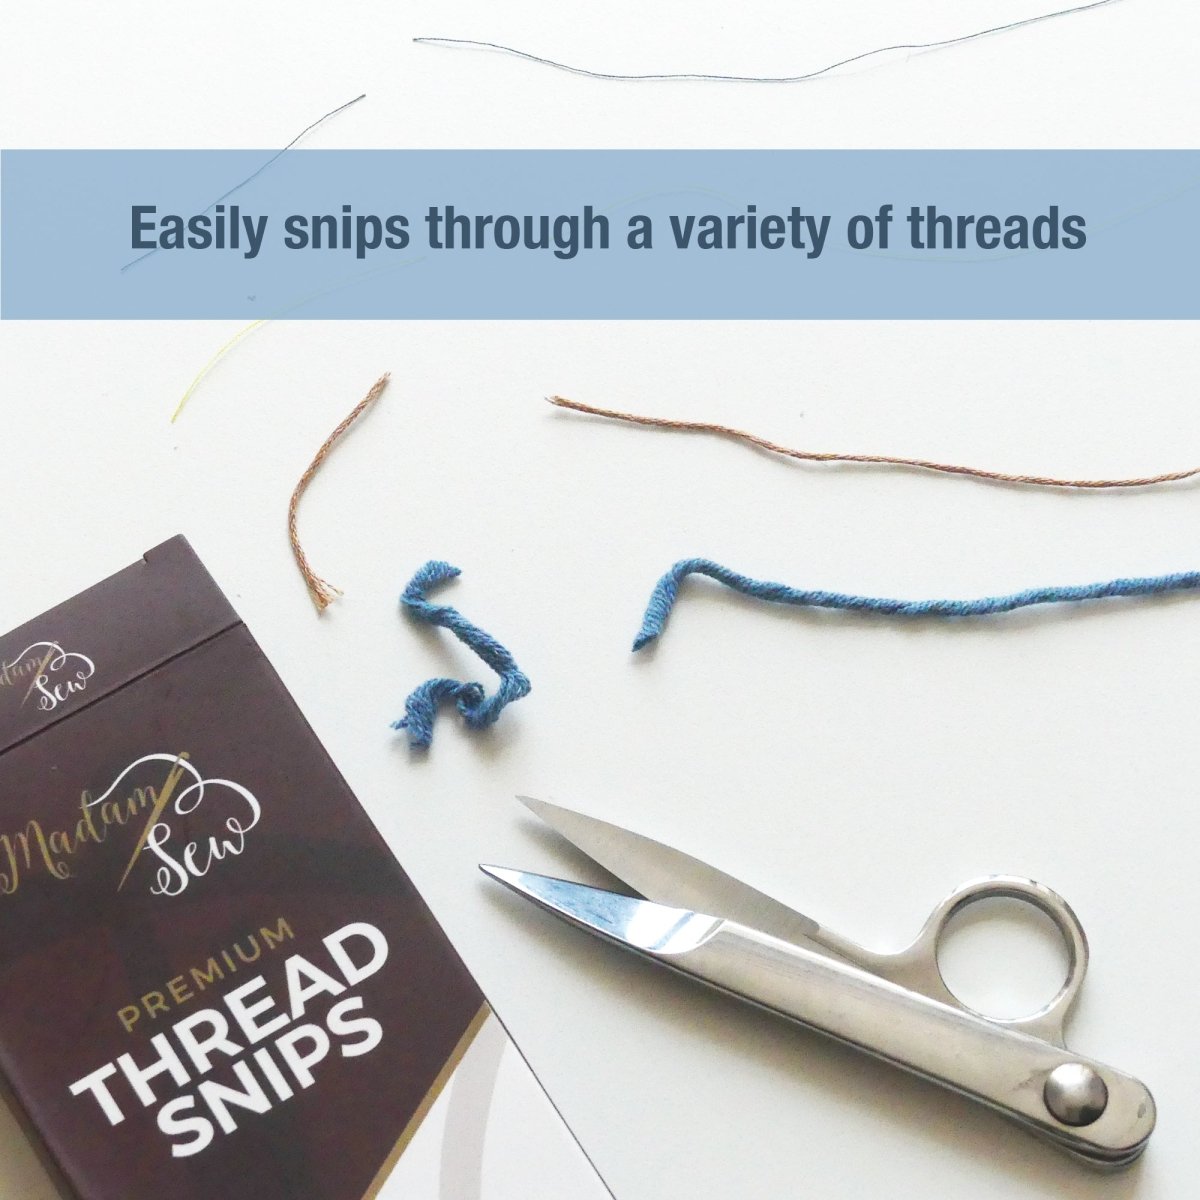 Madam Sew thread snips and the box and thread ends